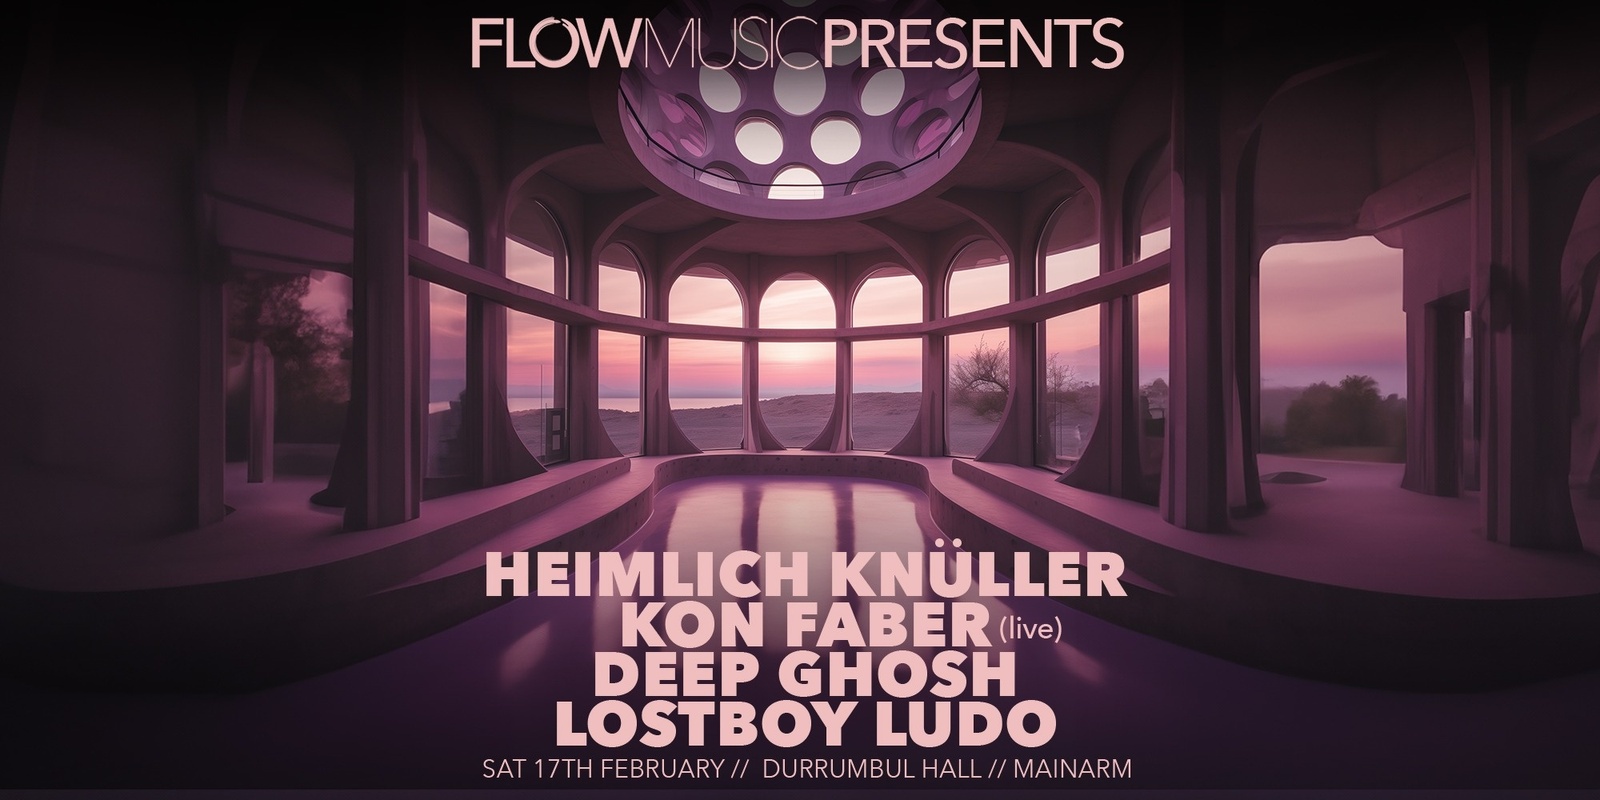 Banner image for Flow Music Presents: Heimlich Knüller, Kon Faber (live) and Lostboy Ludo